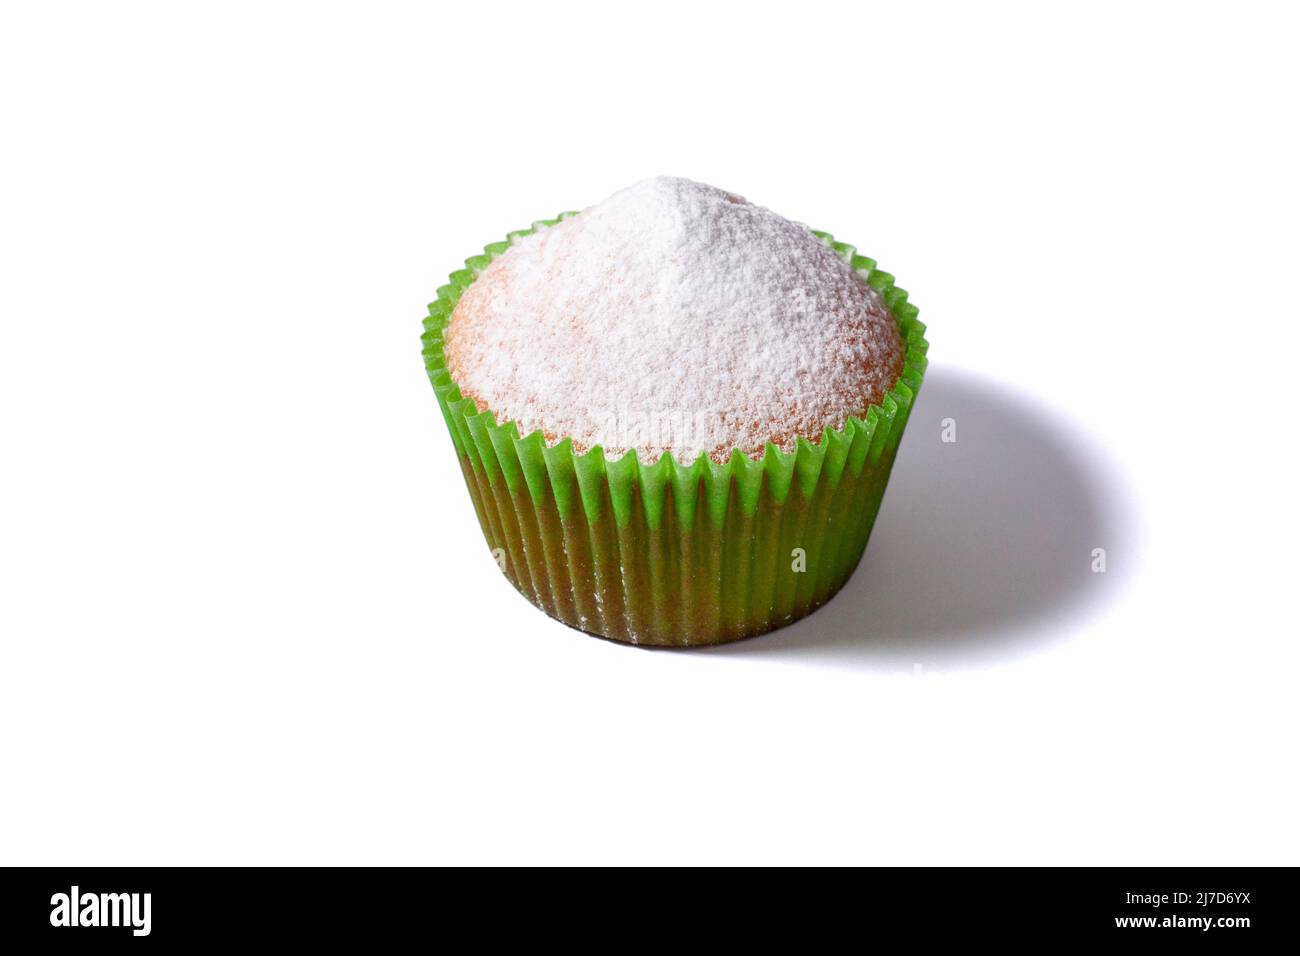 https://c8.alamy.com/comp/2J7D6YX/vanilla-cupcake-sprinkled-with-powdered-sugar-homemade-cupcake-in-paper-liners-isolated-on-white-background-2J7D6YX.jpg